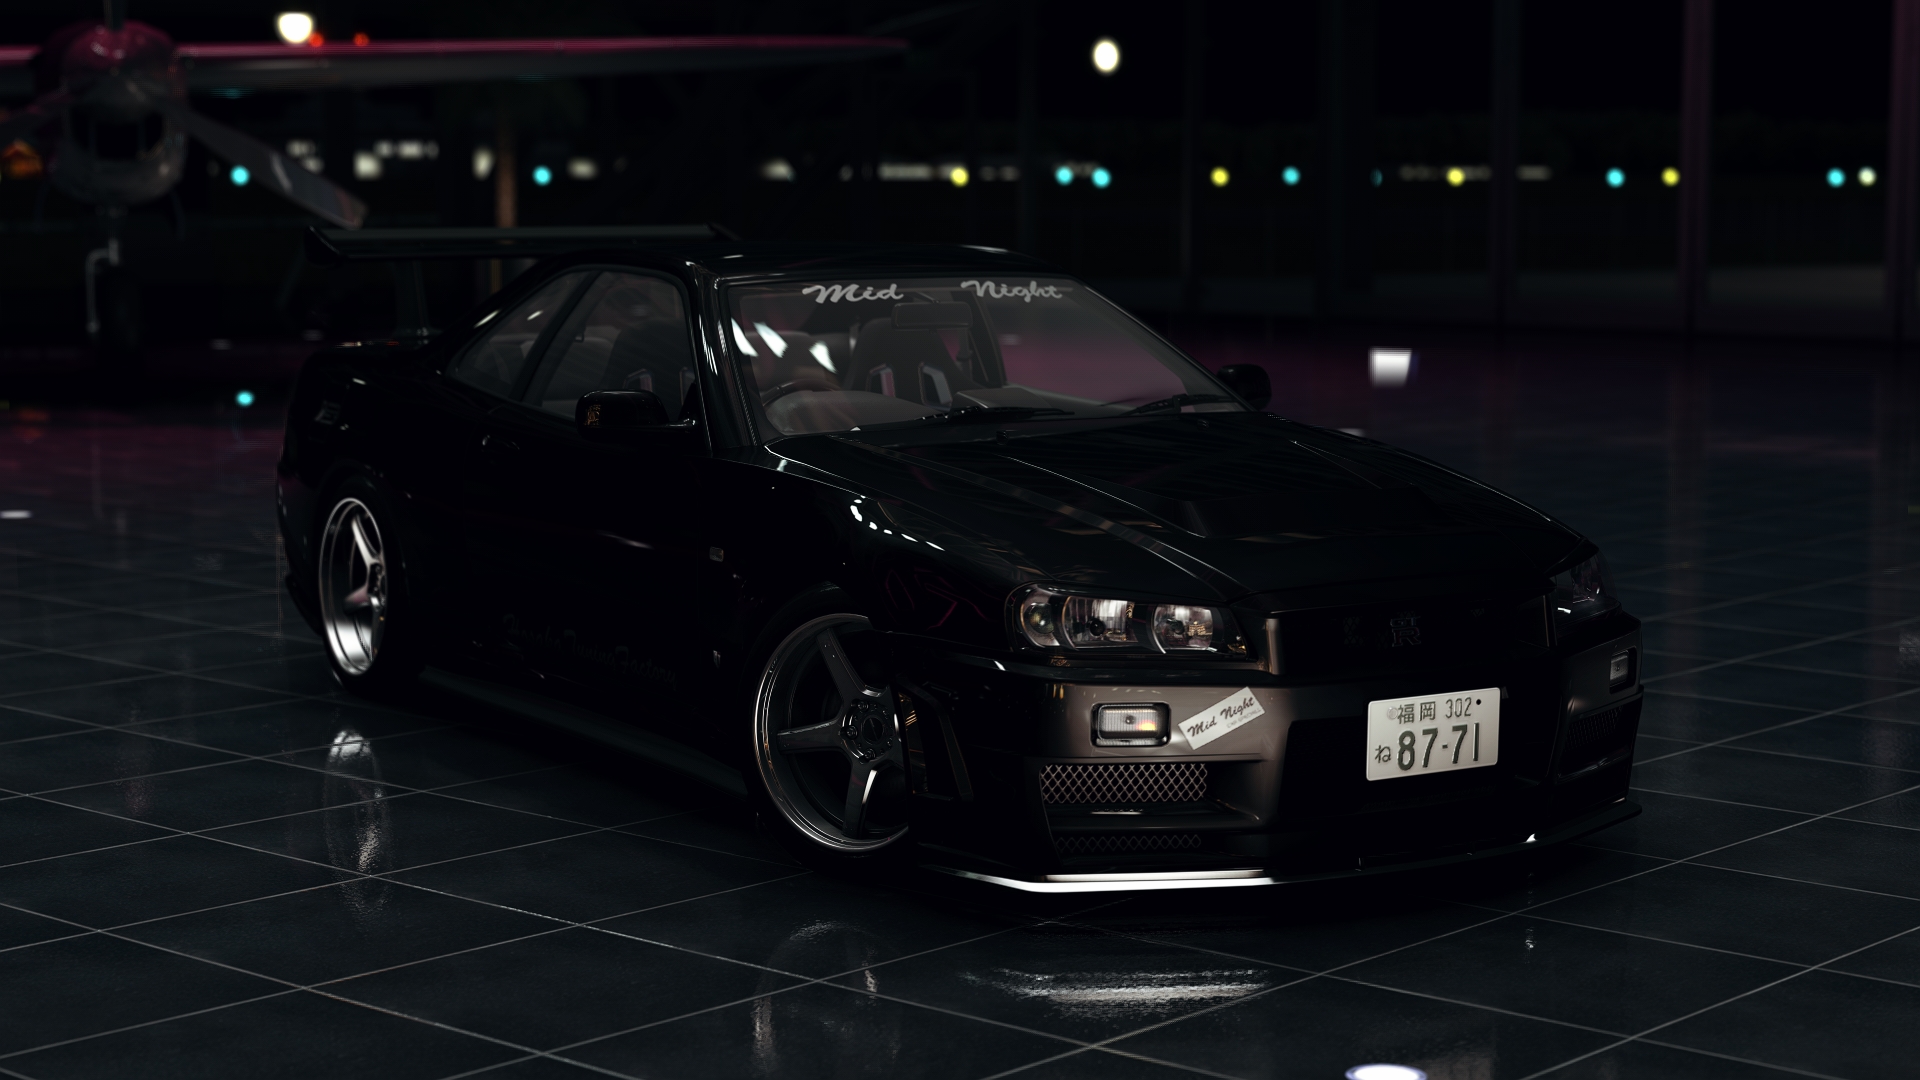 XS Engineering Skyline GT-R BNR 34 Preview Image